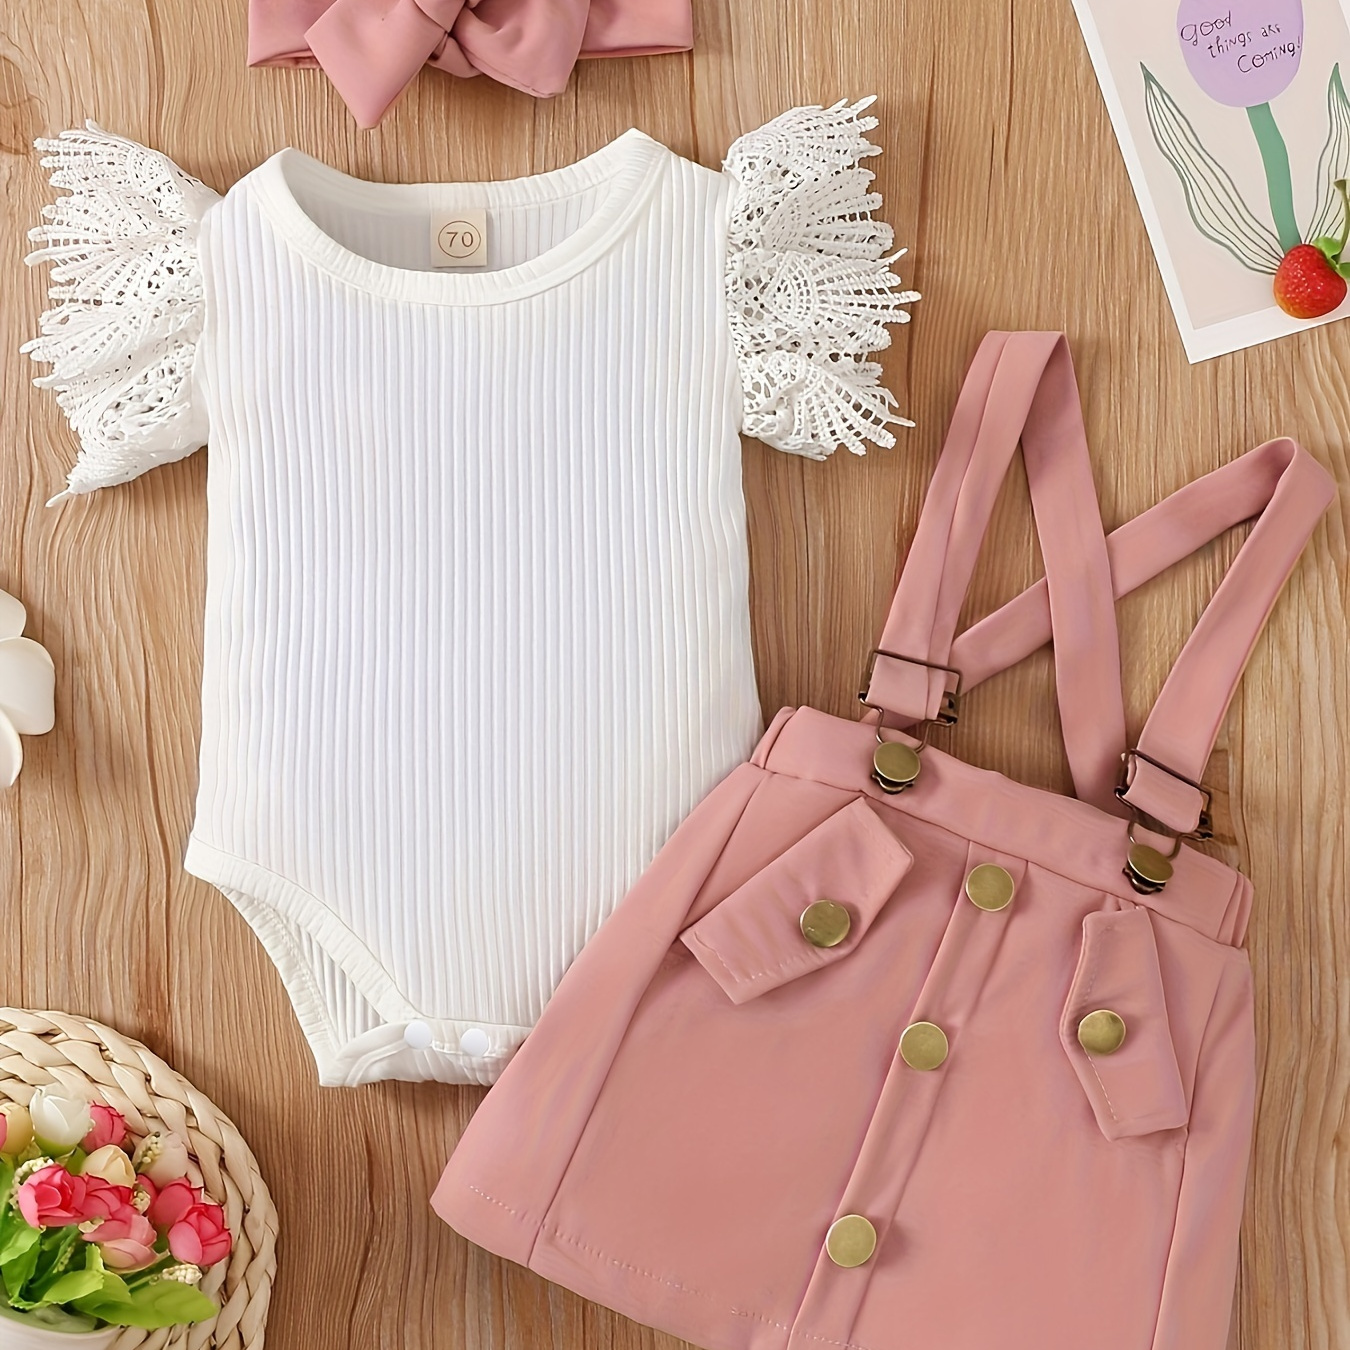 

Baby's Casual Dress 2pcs Outfit, Lace Sleeve Ribbed Onesie & Overall Skirt Set, Toddler & Infant Girl's Clothes